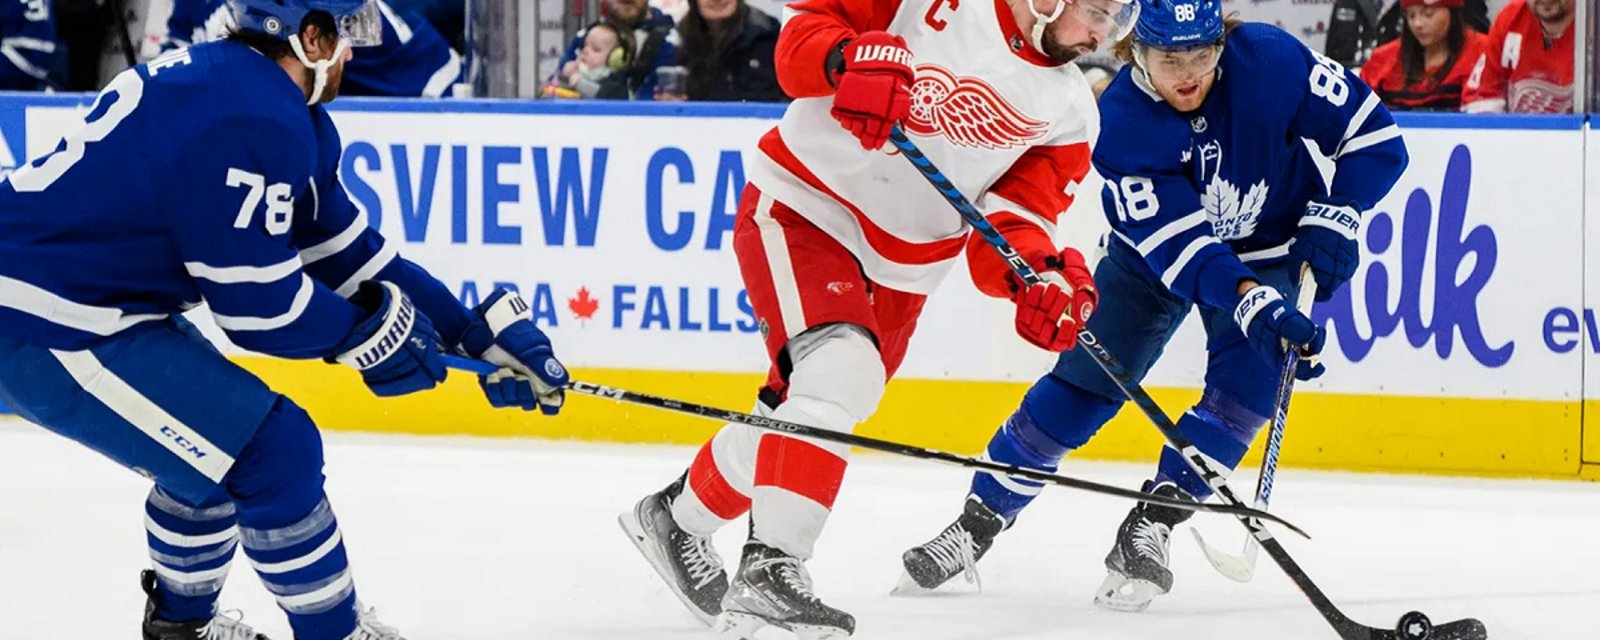 Red Wings vs Maple Leafs rescheduled on Sunday night.